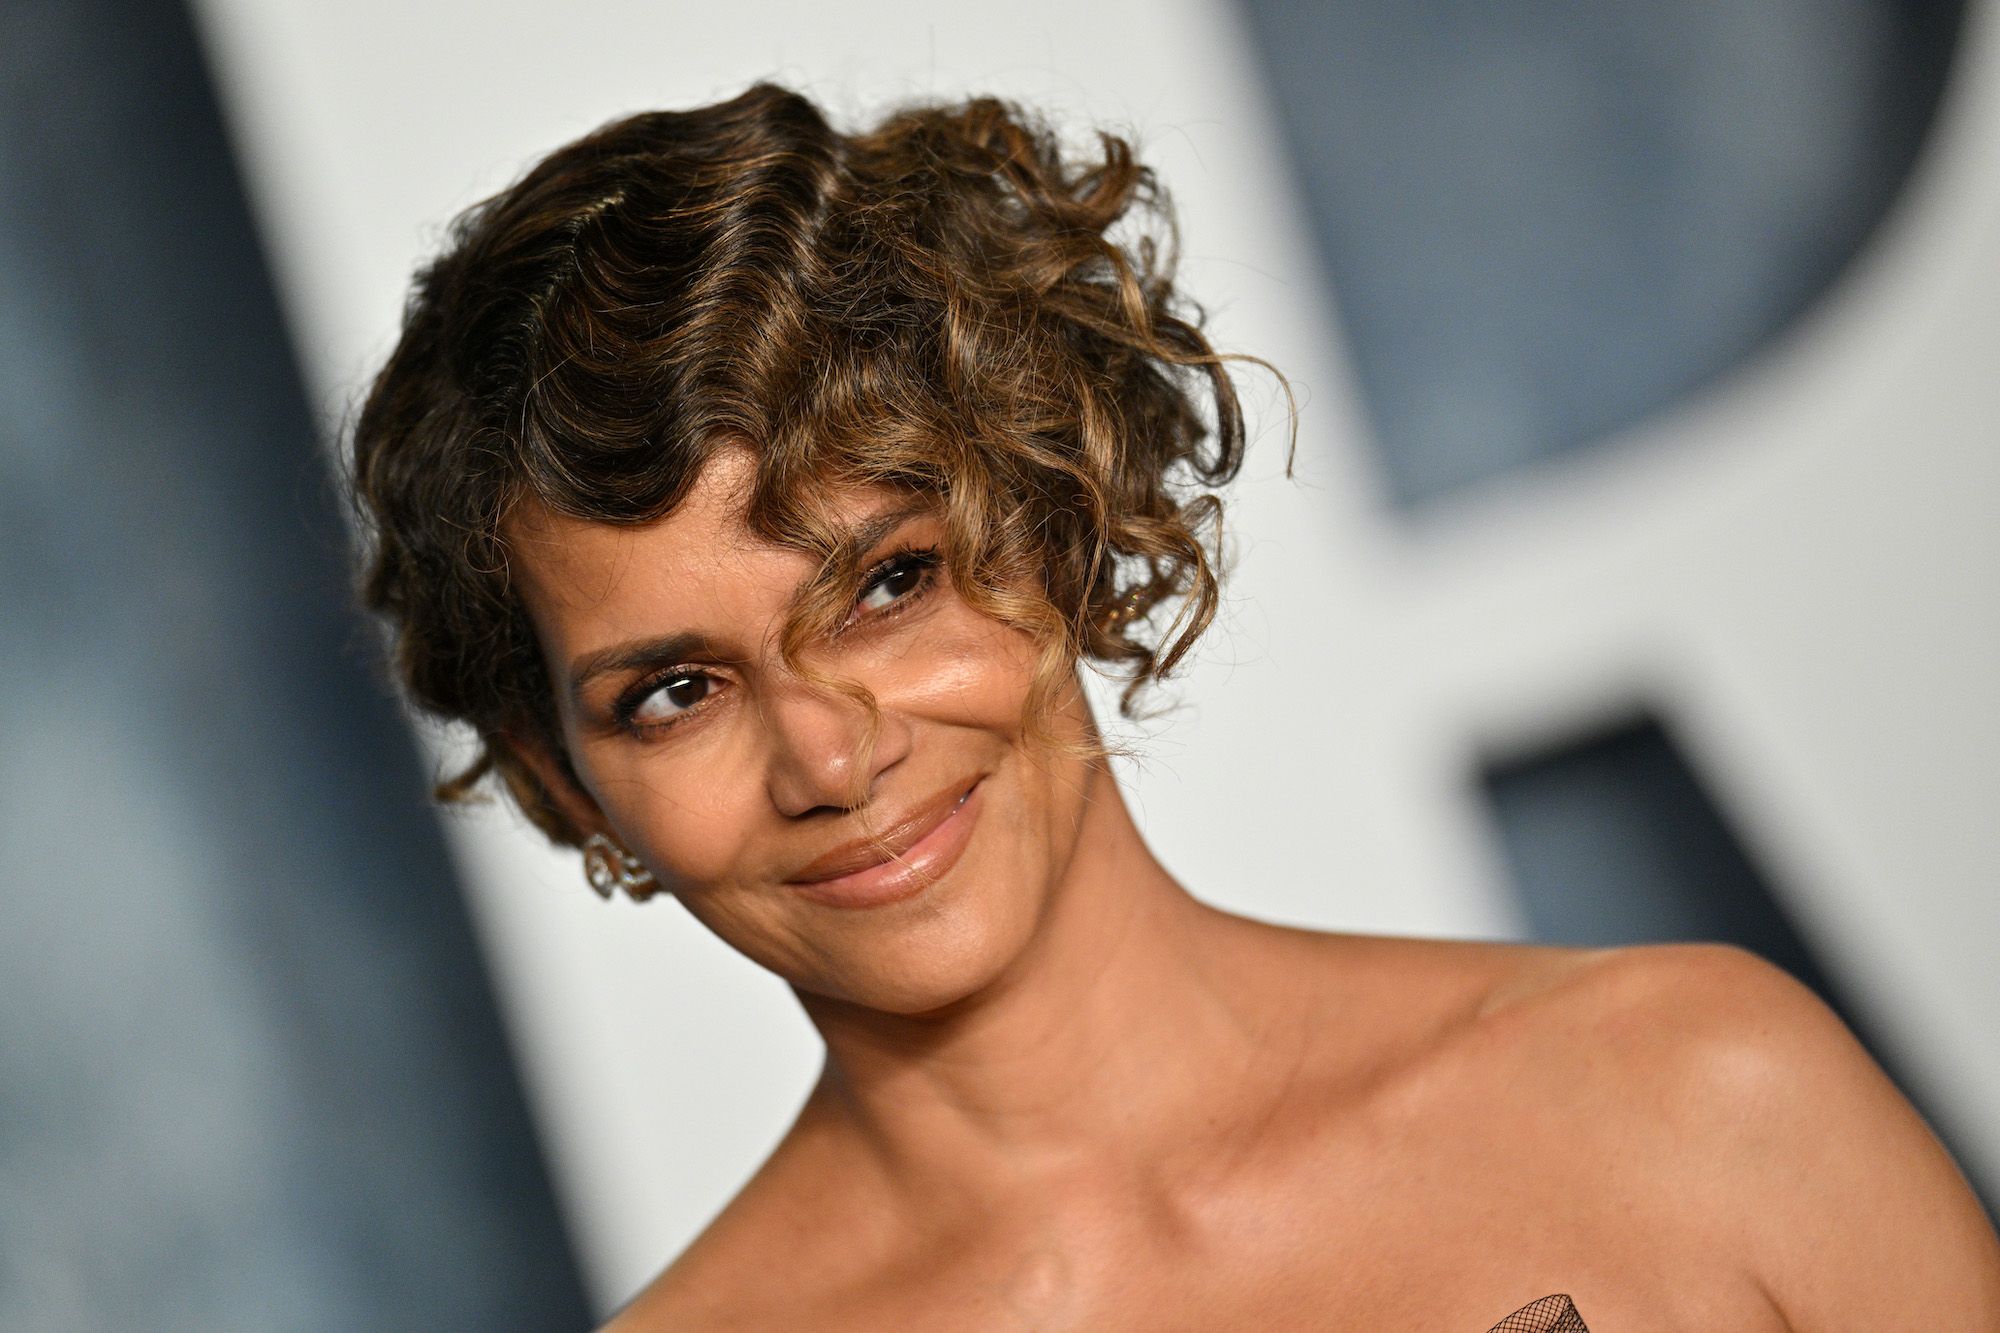 dan bessette recommends Halle Berry In Nude